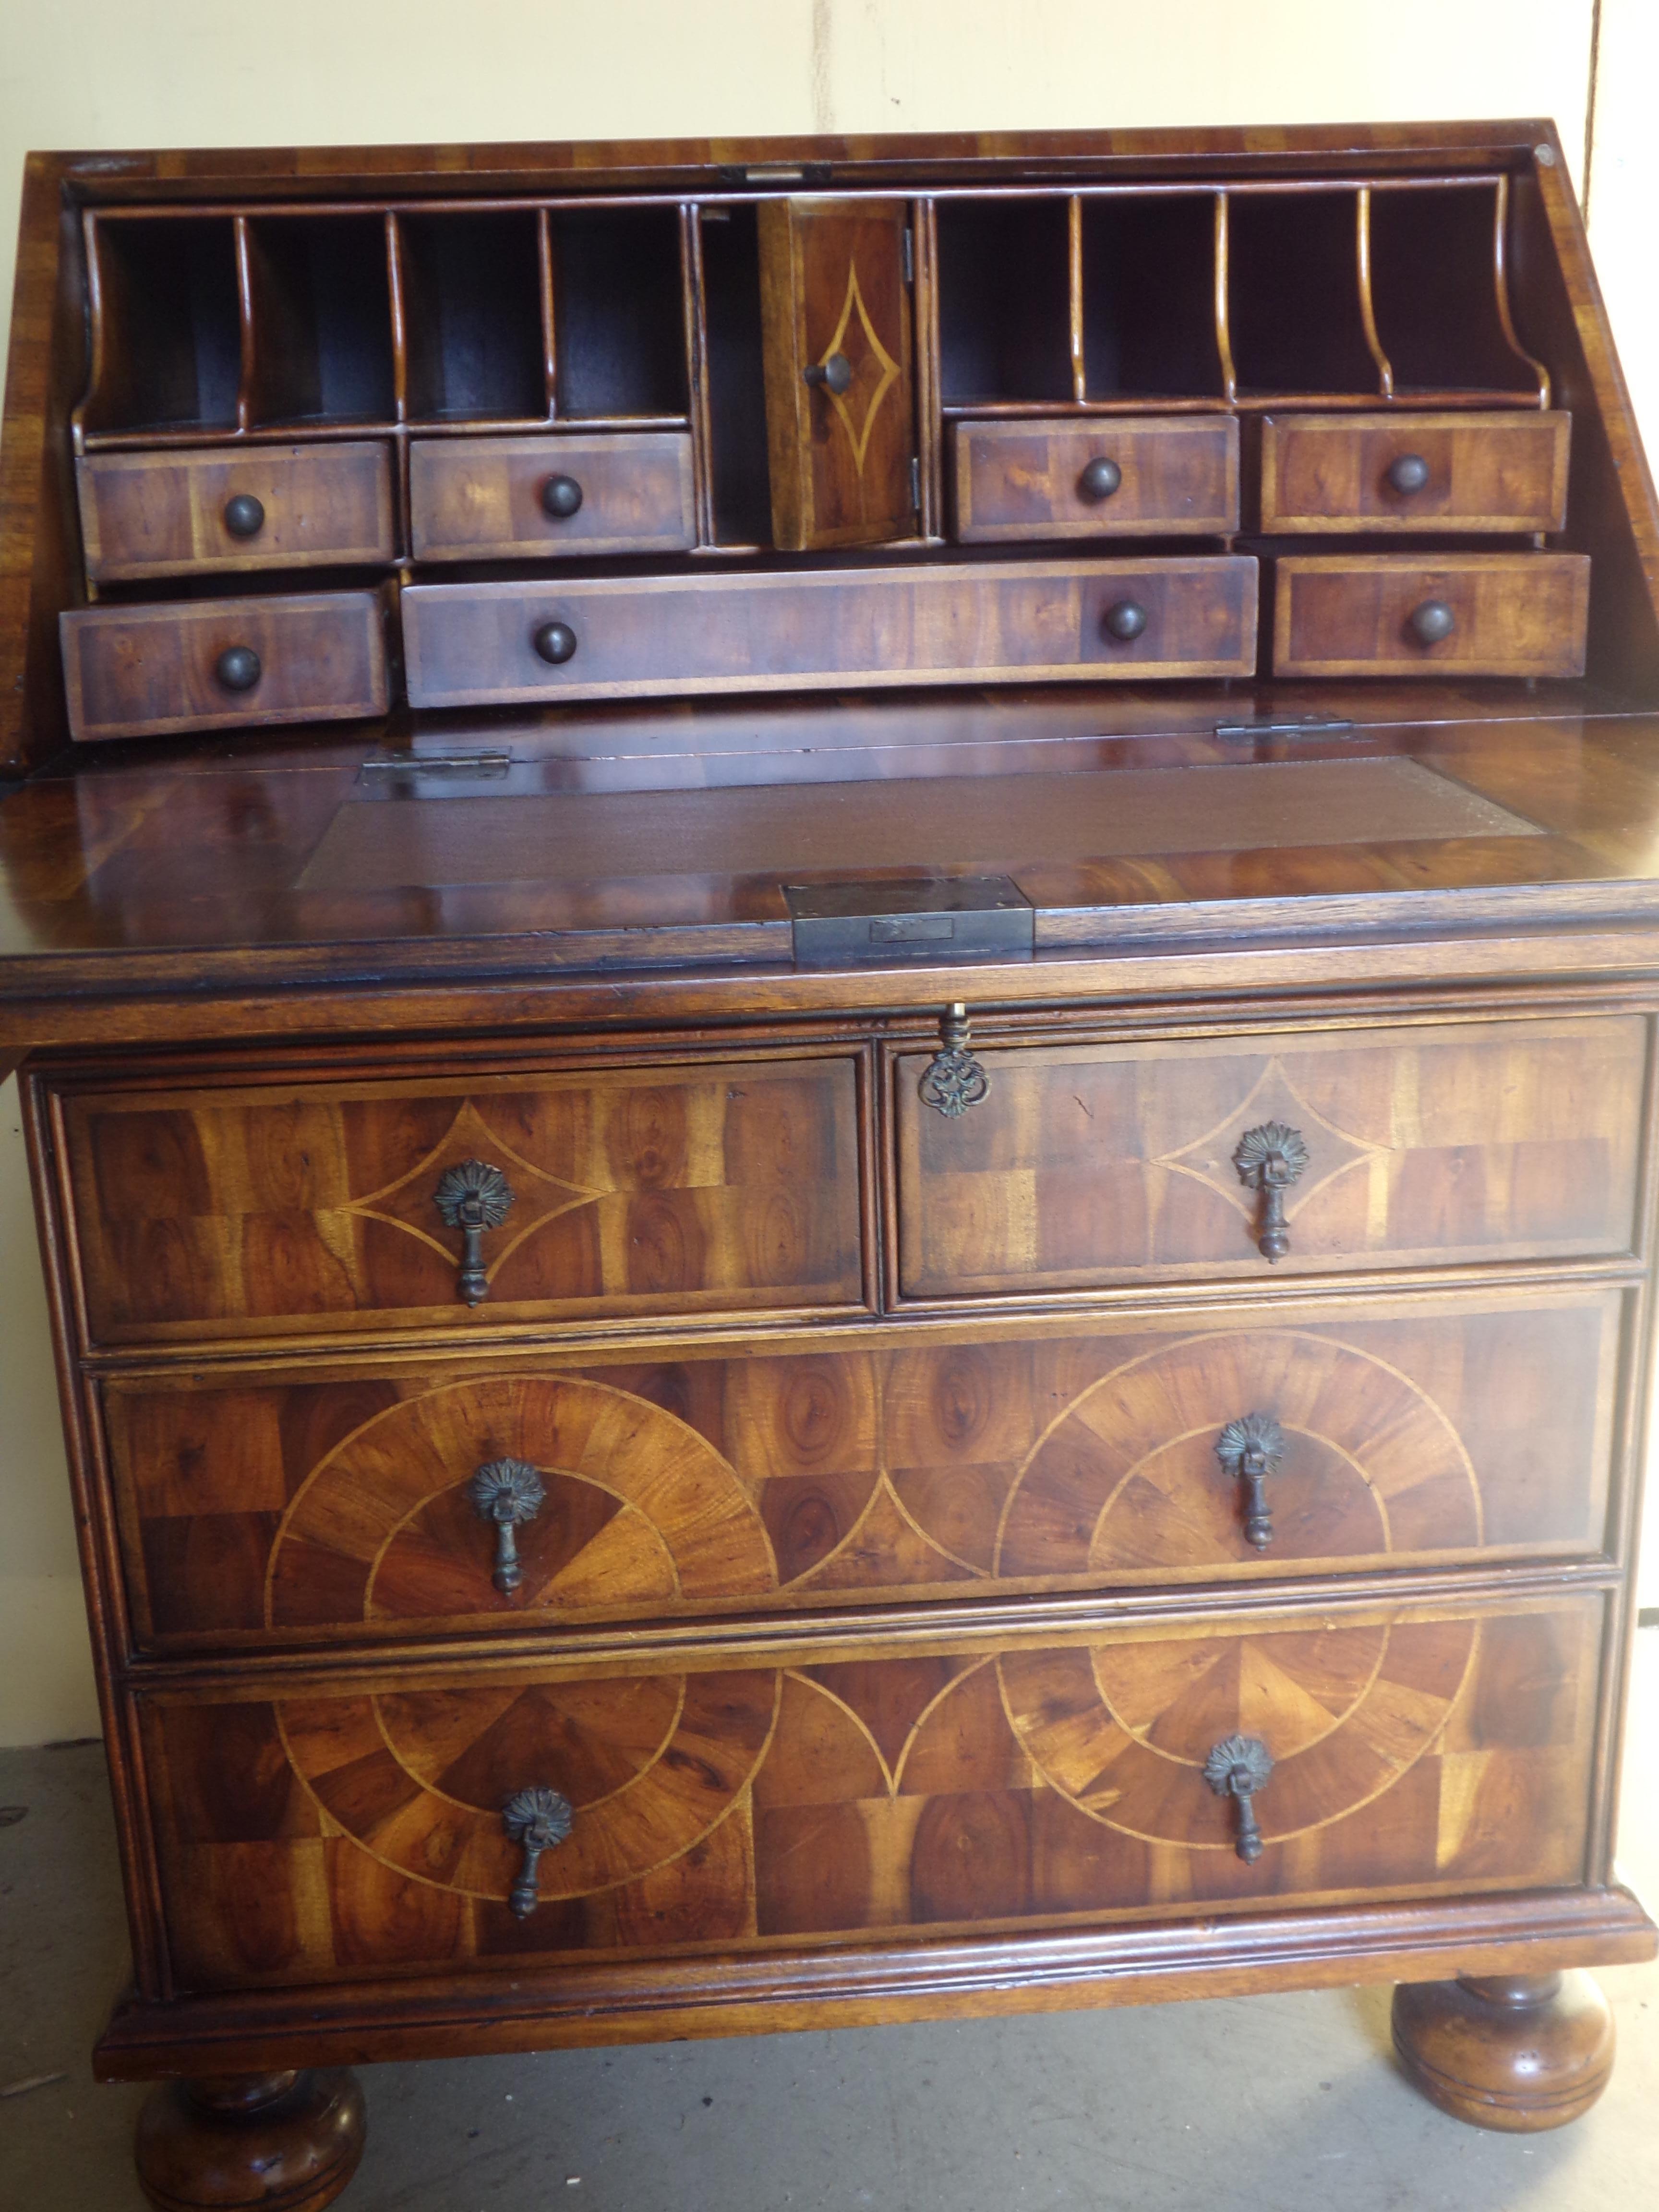 A stunning fall front George the first style bureau in Laburnum Oyster veneers with parquetry inlay, circa 1960. Beautifully reproduced by a master craftsman this fine bureaux will be the centre of attention in any room.
A chance to own a fine